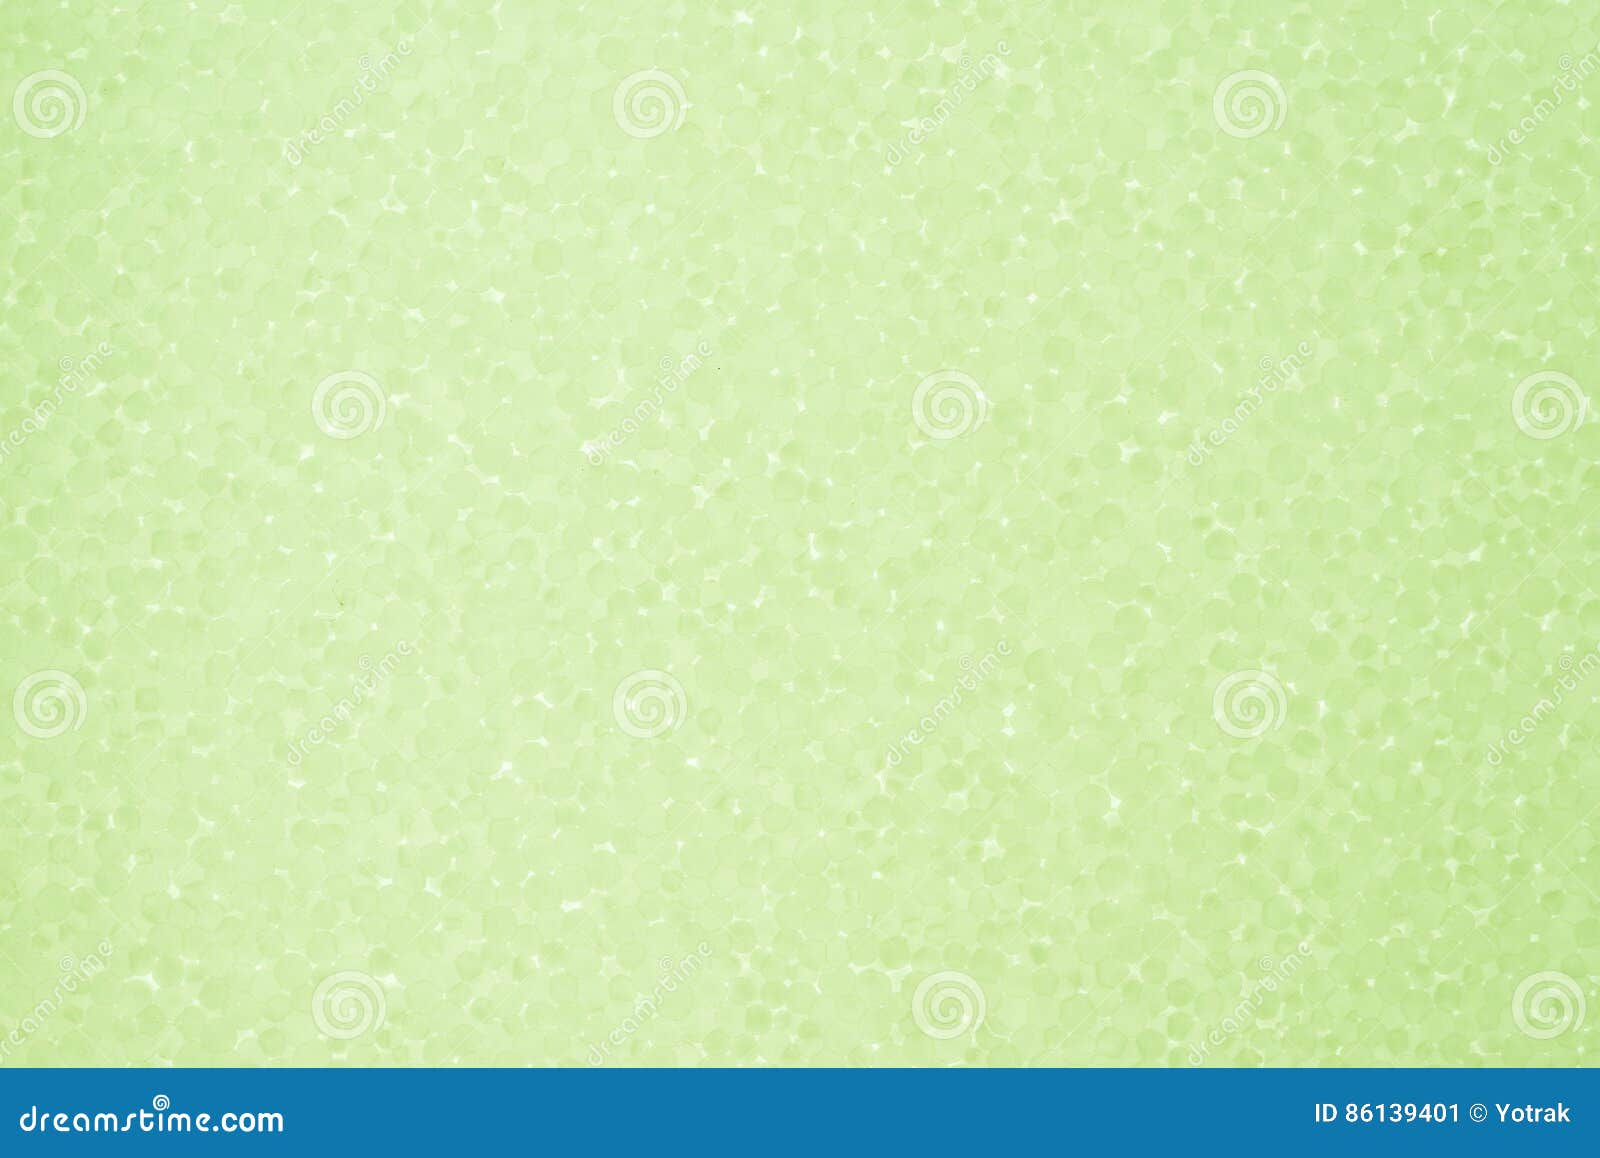 Styrofoam Light Green Texture Stock Image - Image of bubble, structure:  86139401